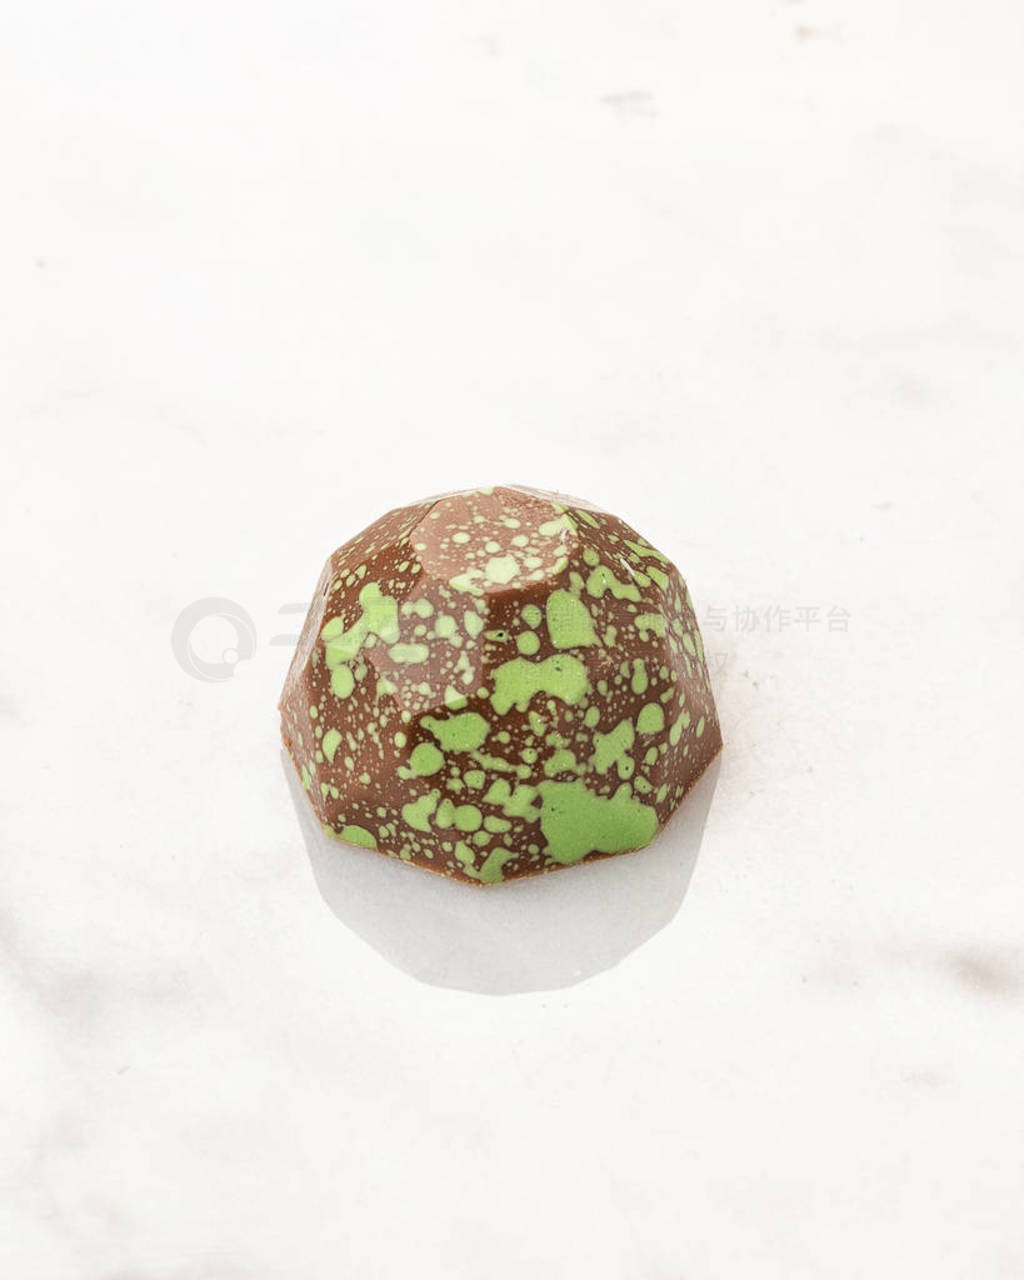 Exclusive handcrafted chocolate candy on white marble background